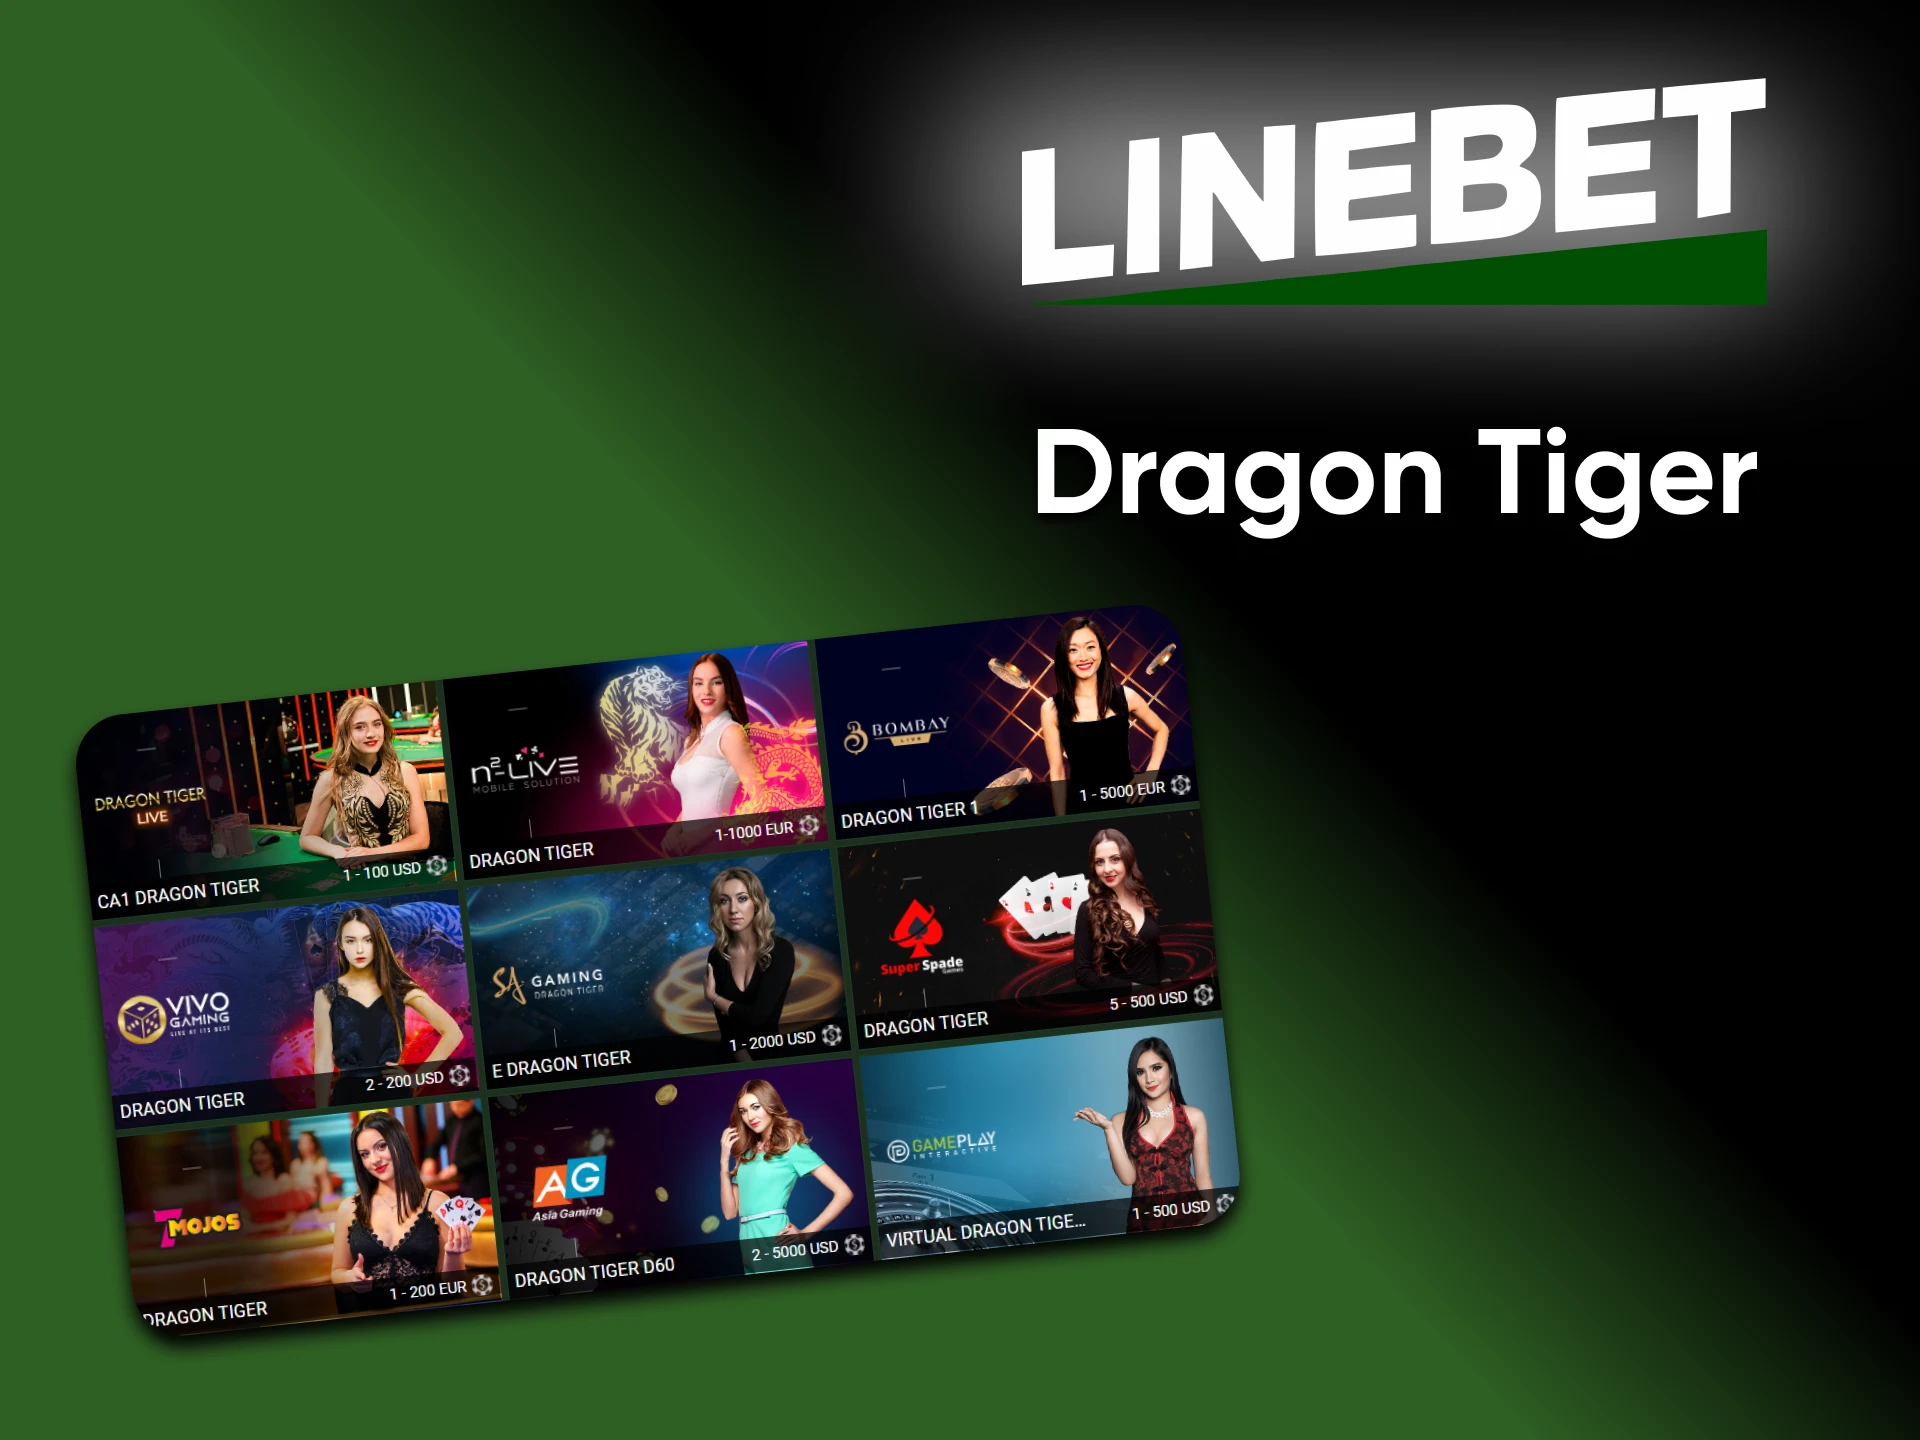 At Linebet casino you can play Dragon Tiger.